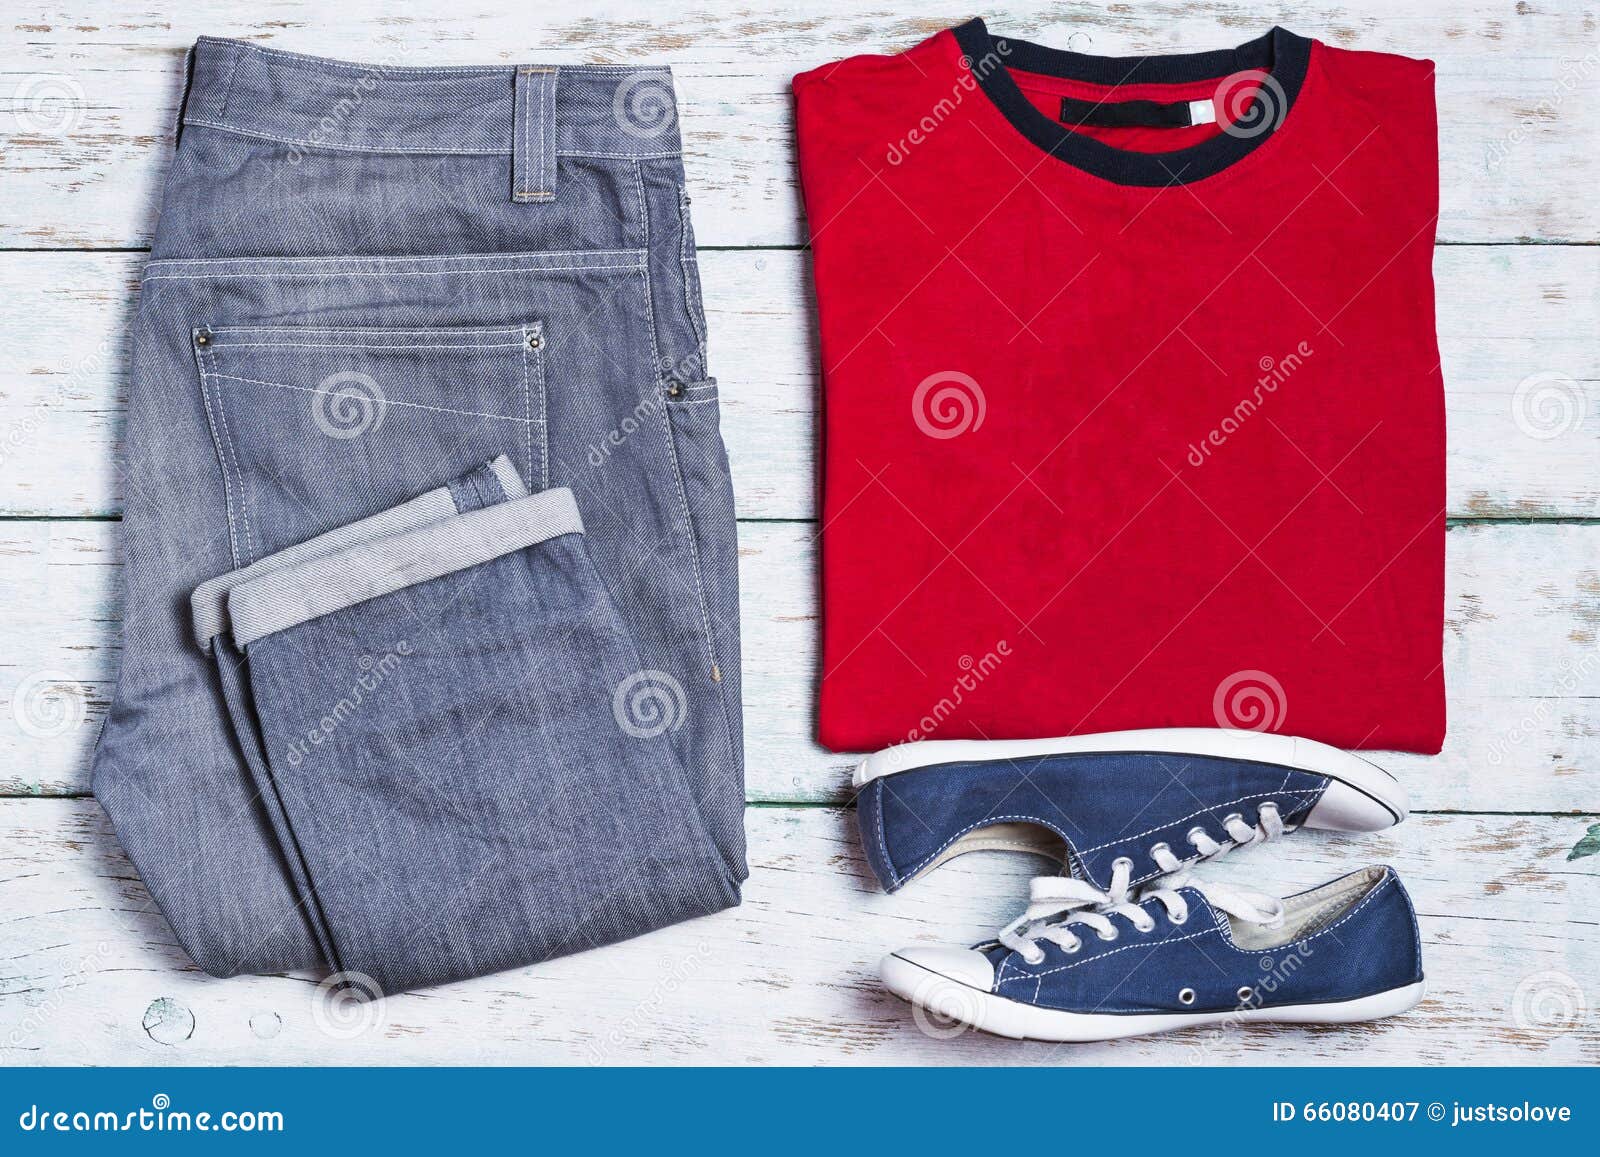 Mens Casual Outfit On Wooden Background Stock Image - Image of life ...